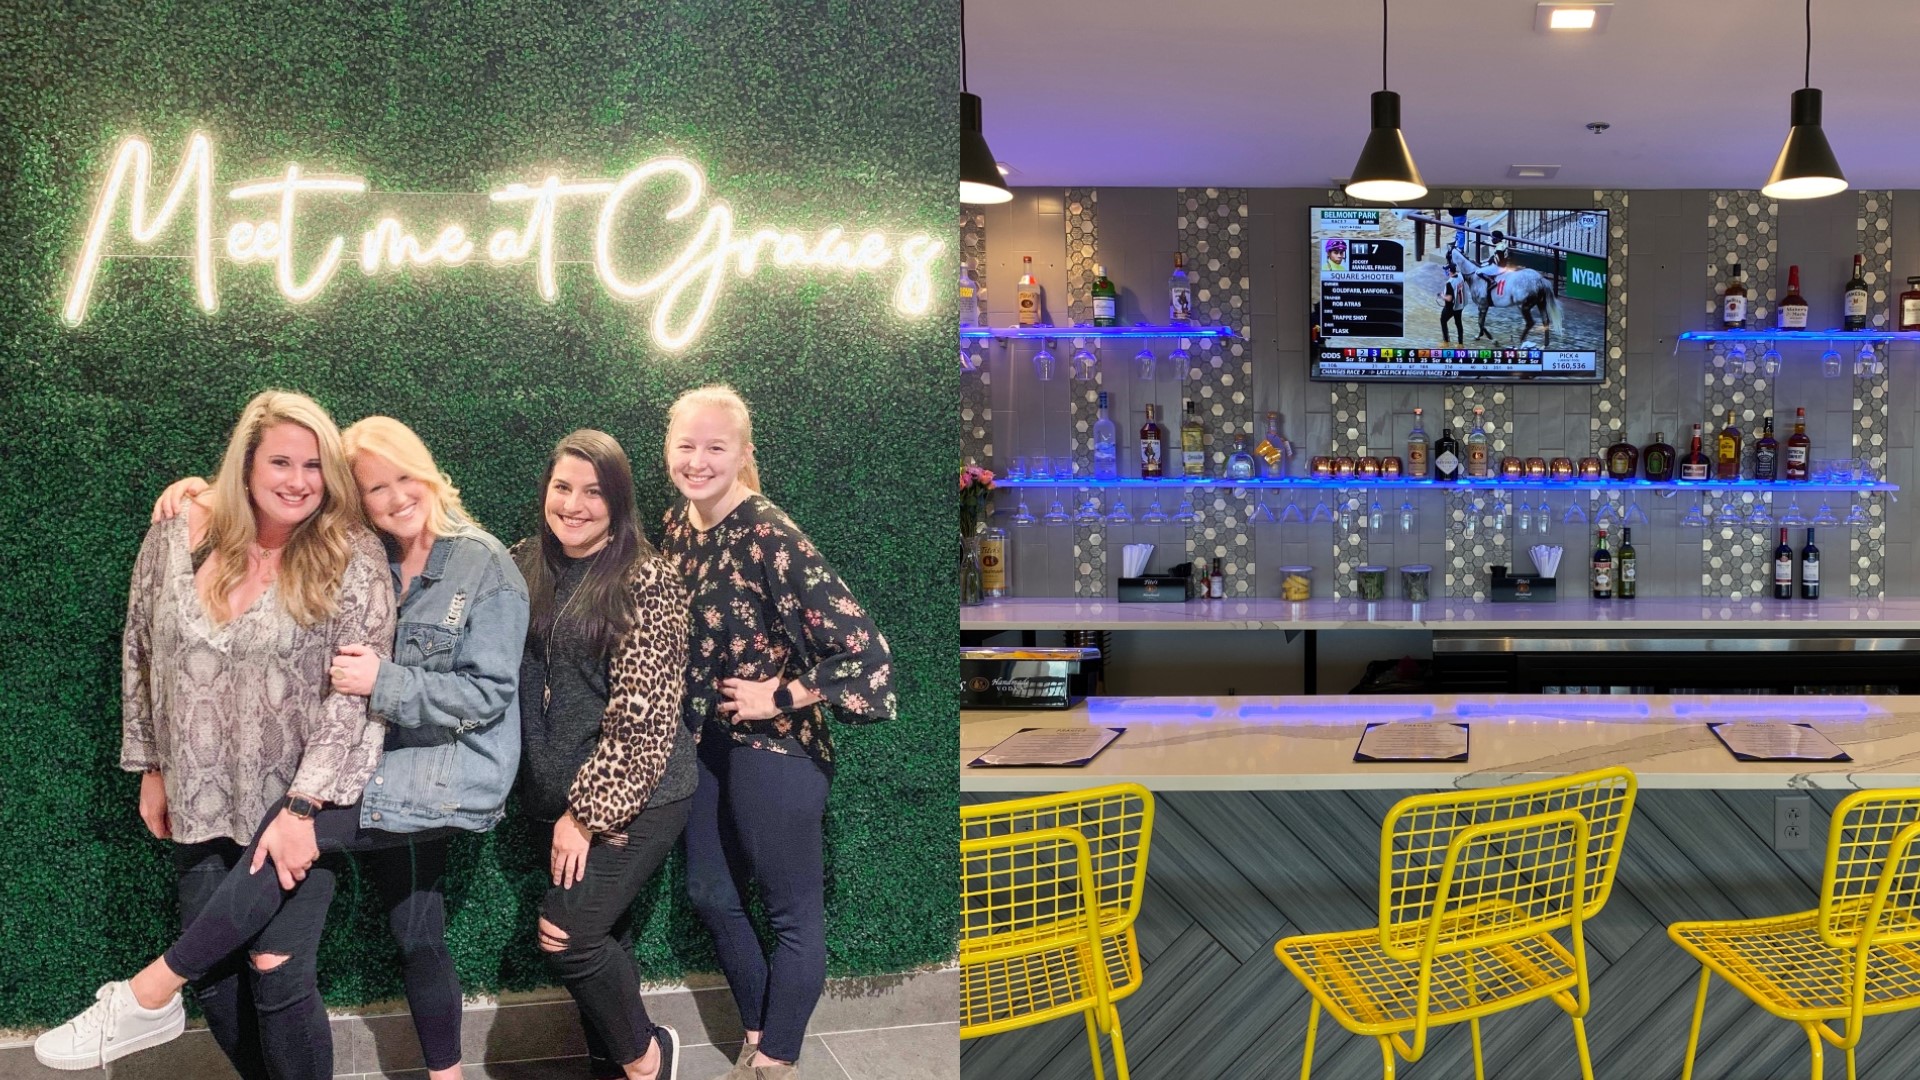 Gracie’s: A Rooftop Bar opened this month and the owner says its trendy atmosphere and sunset views make the space ideal for Instagram-worthy photos.